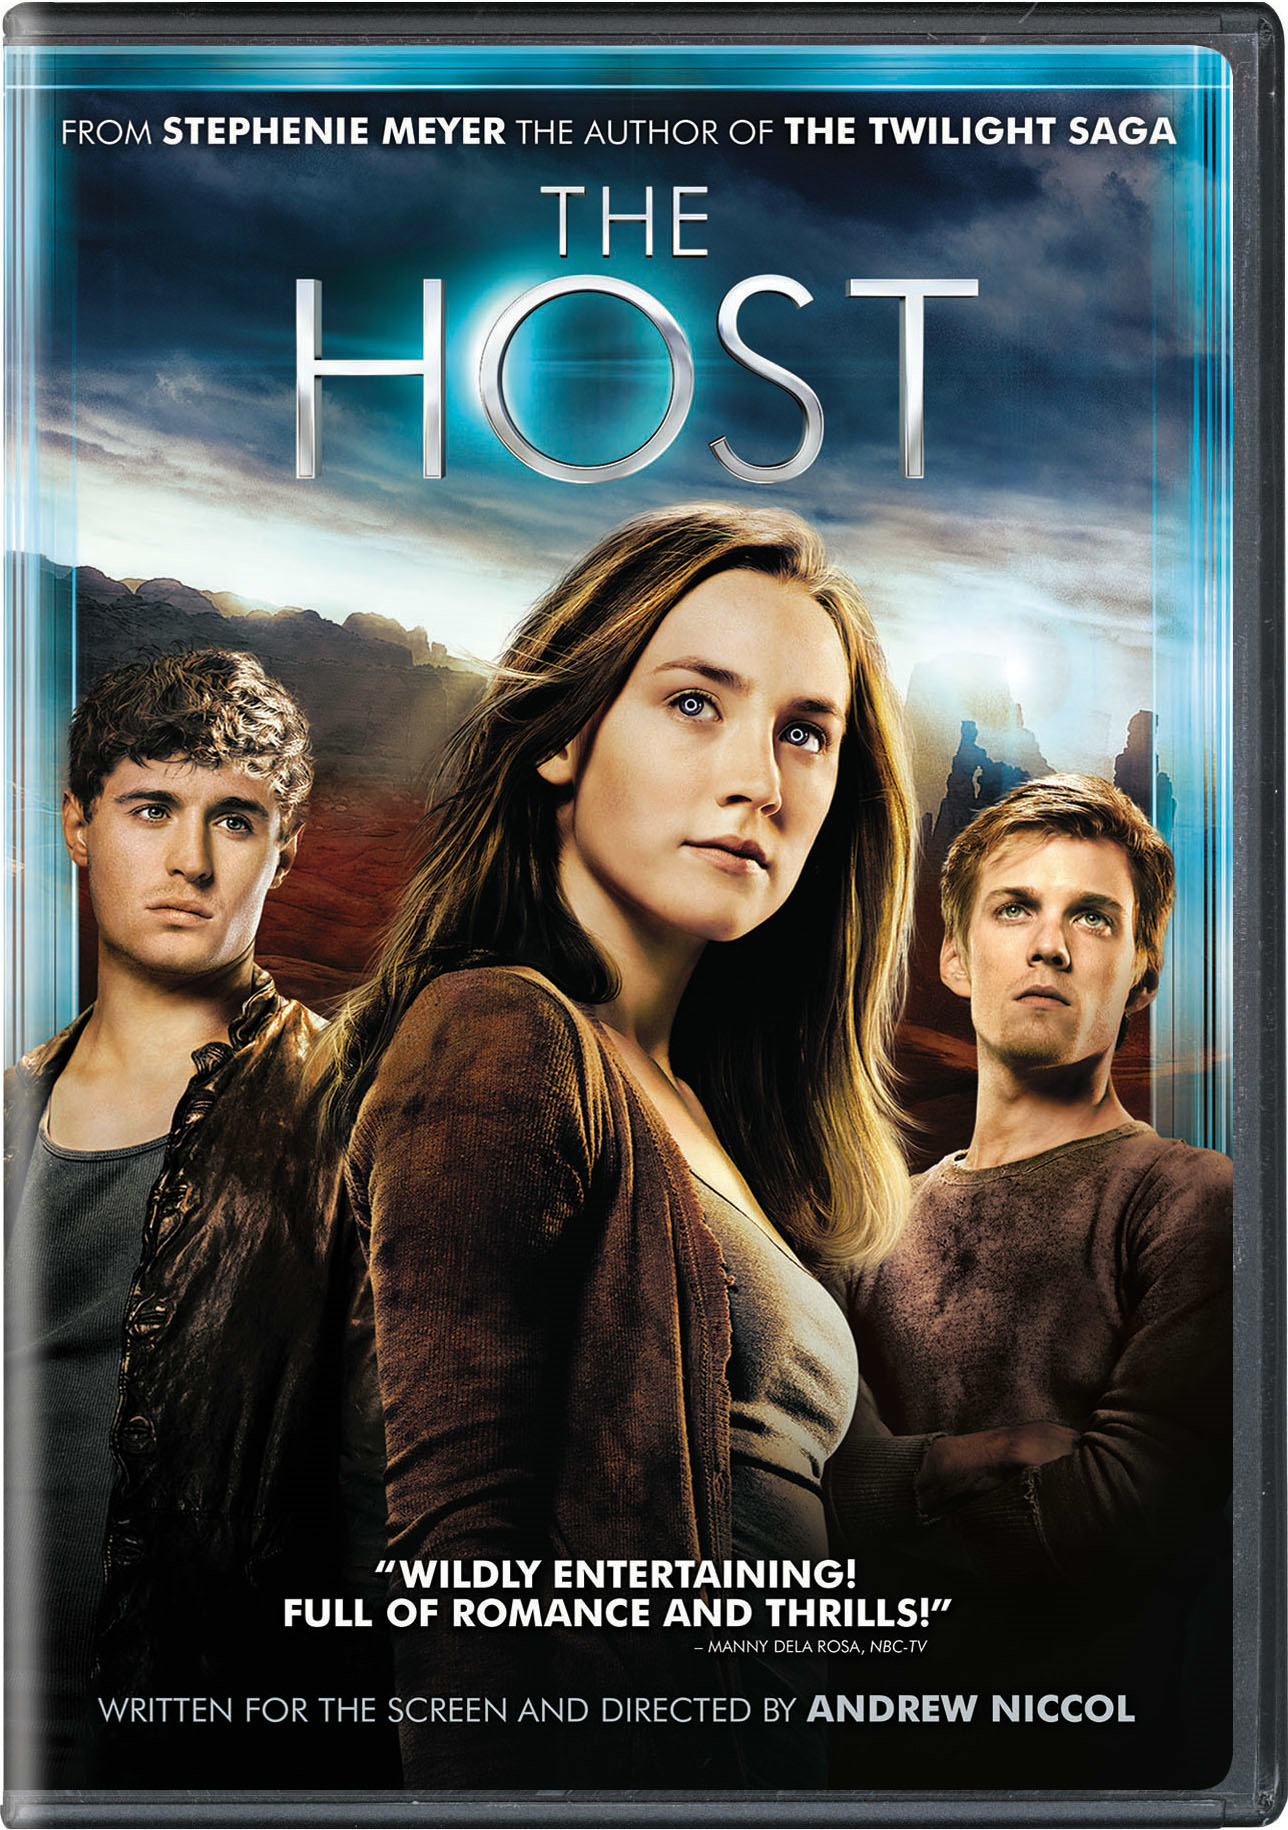 The Host - DVD [ 2013 ]  - Sci Fi Movies On DVD - Movies On GRUV